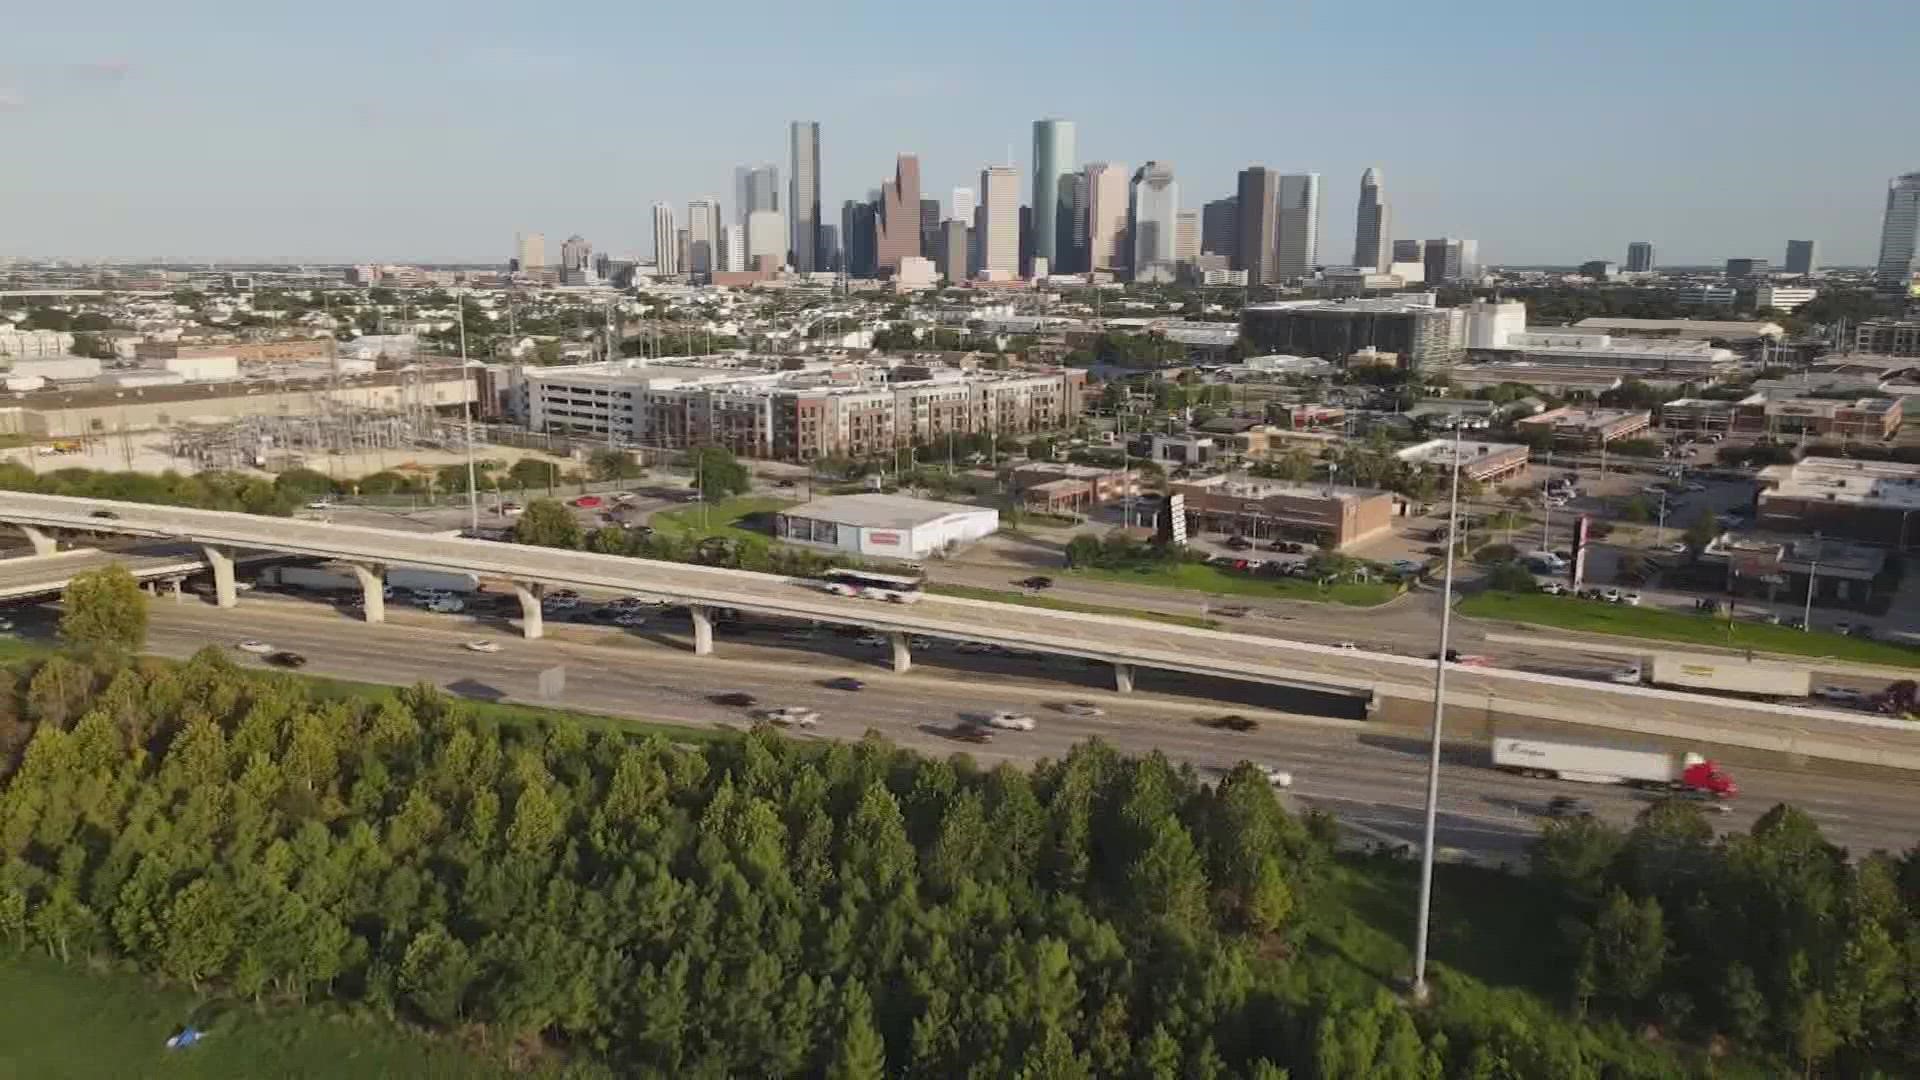 The $347 million project would raise the I-10 main lanes between I-45 and Heights Boulevard in an effort to eliminate flooding risk on the freeway.